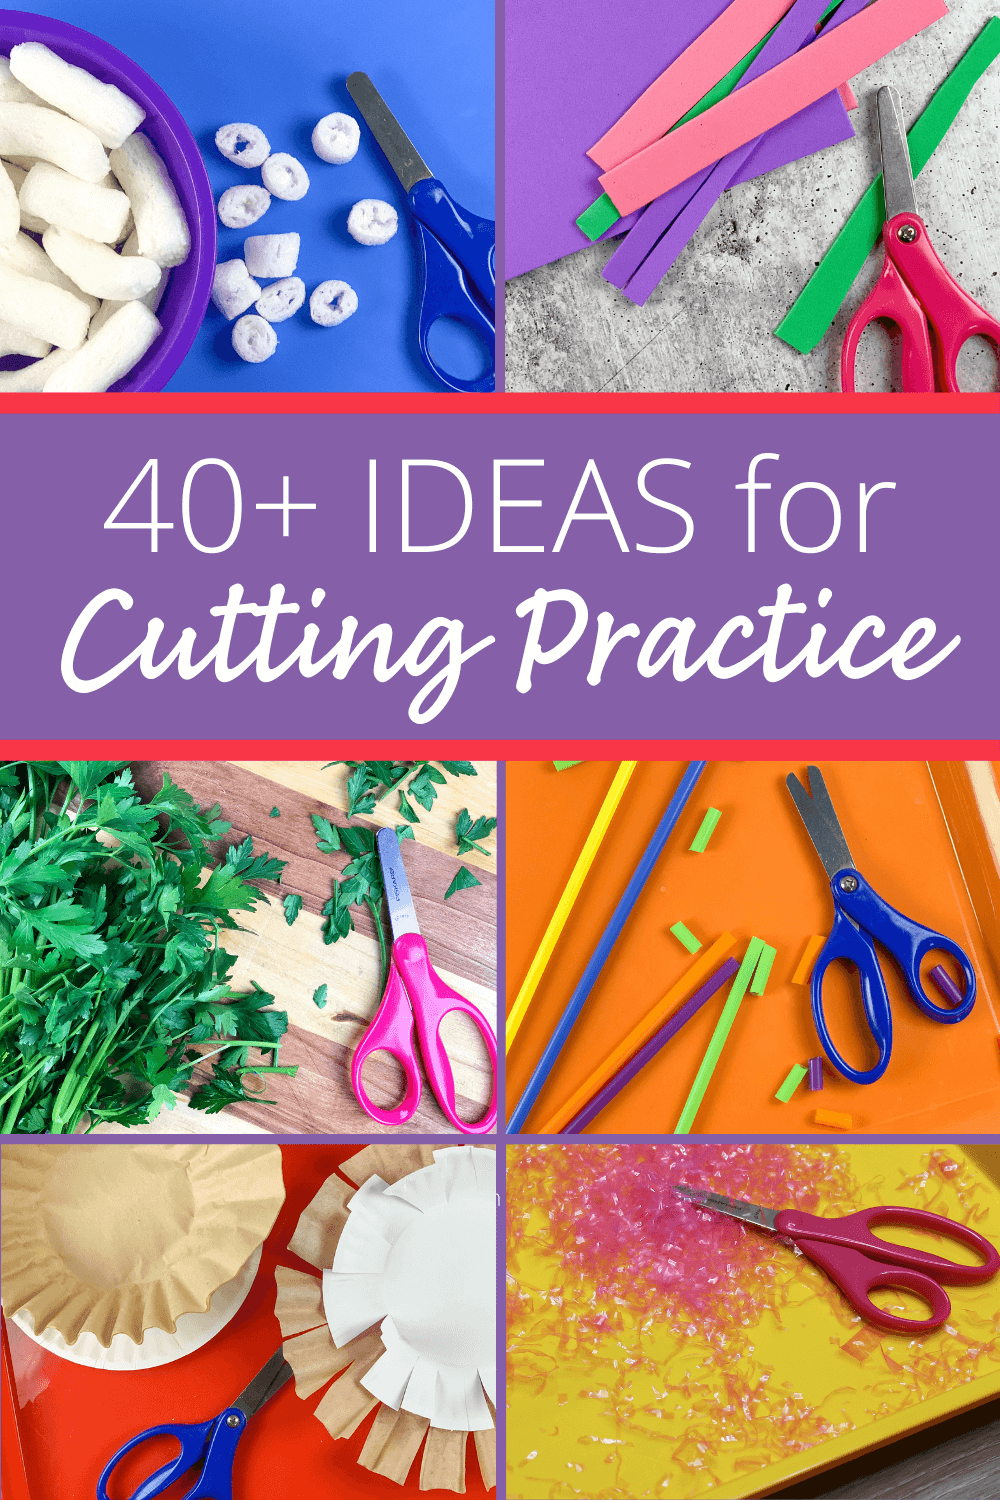 Scissor skills for kids ages 4-8: Cutting practice for kids, A Fun Cutting  Practice Activity Book for Toddlers and Kids ages 4-8